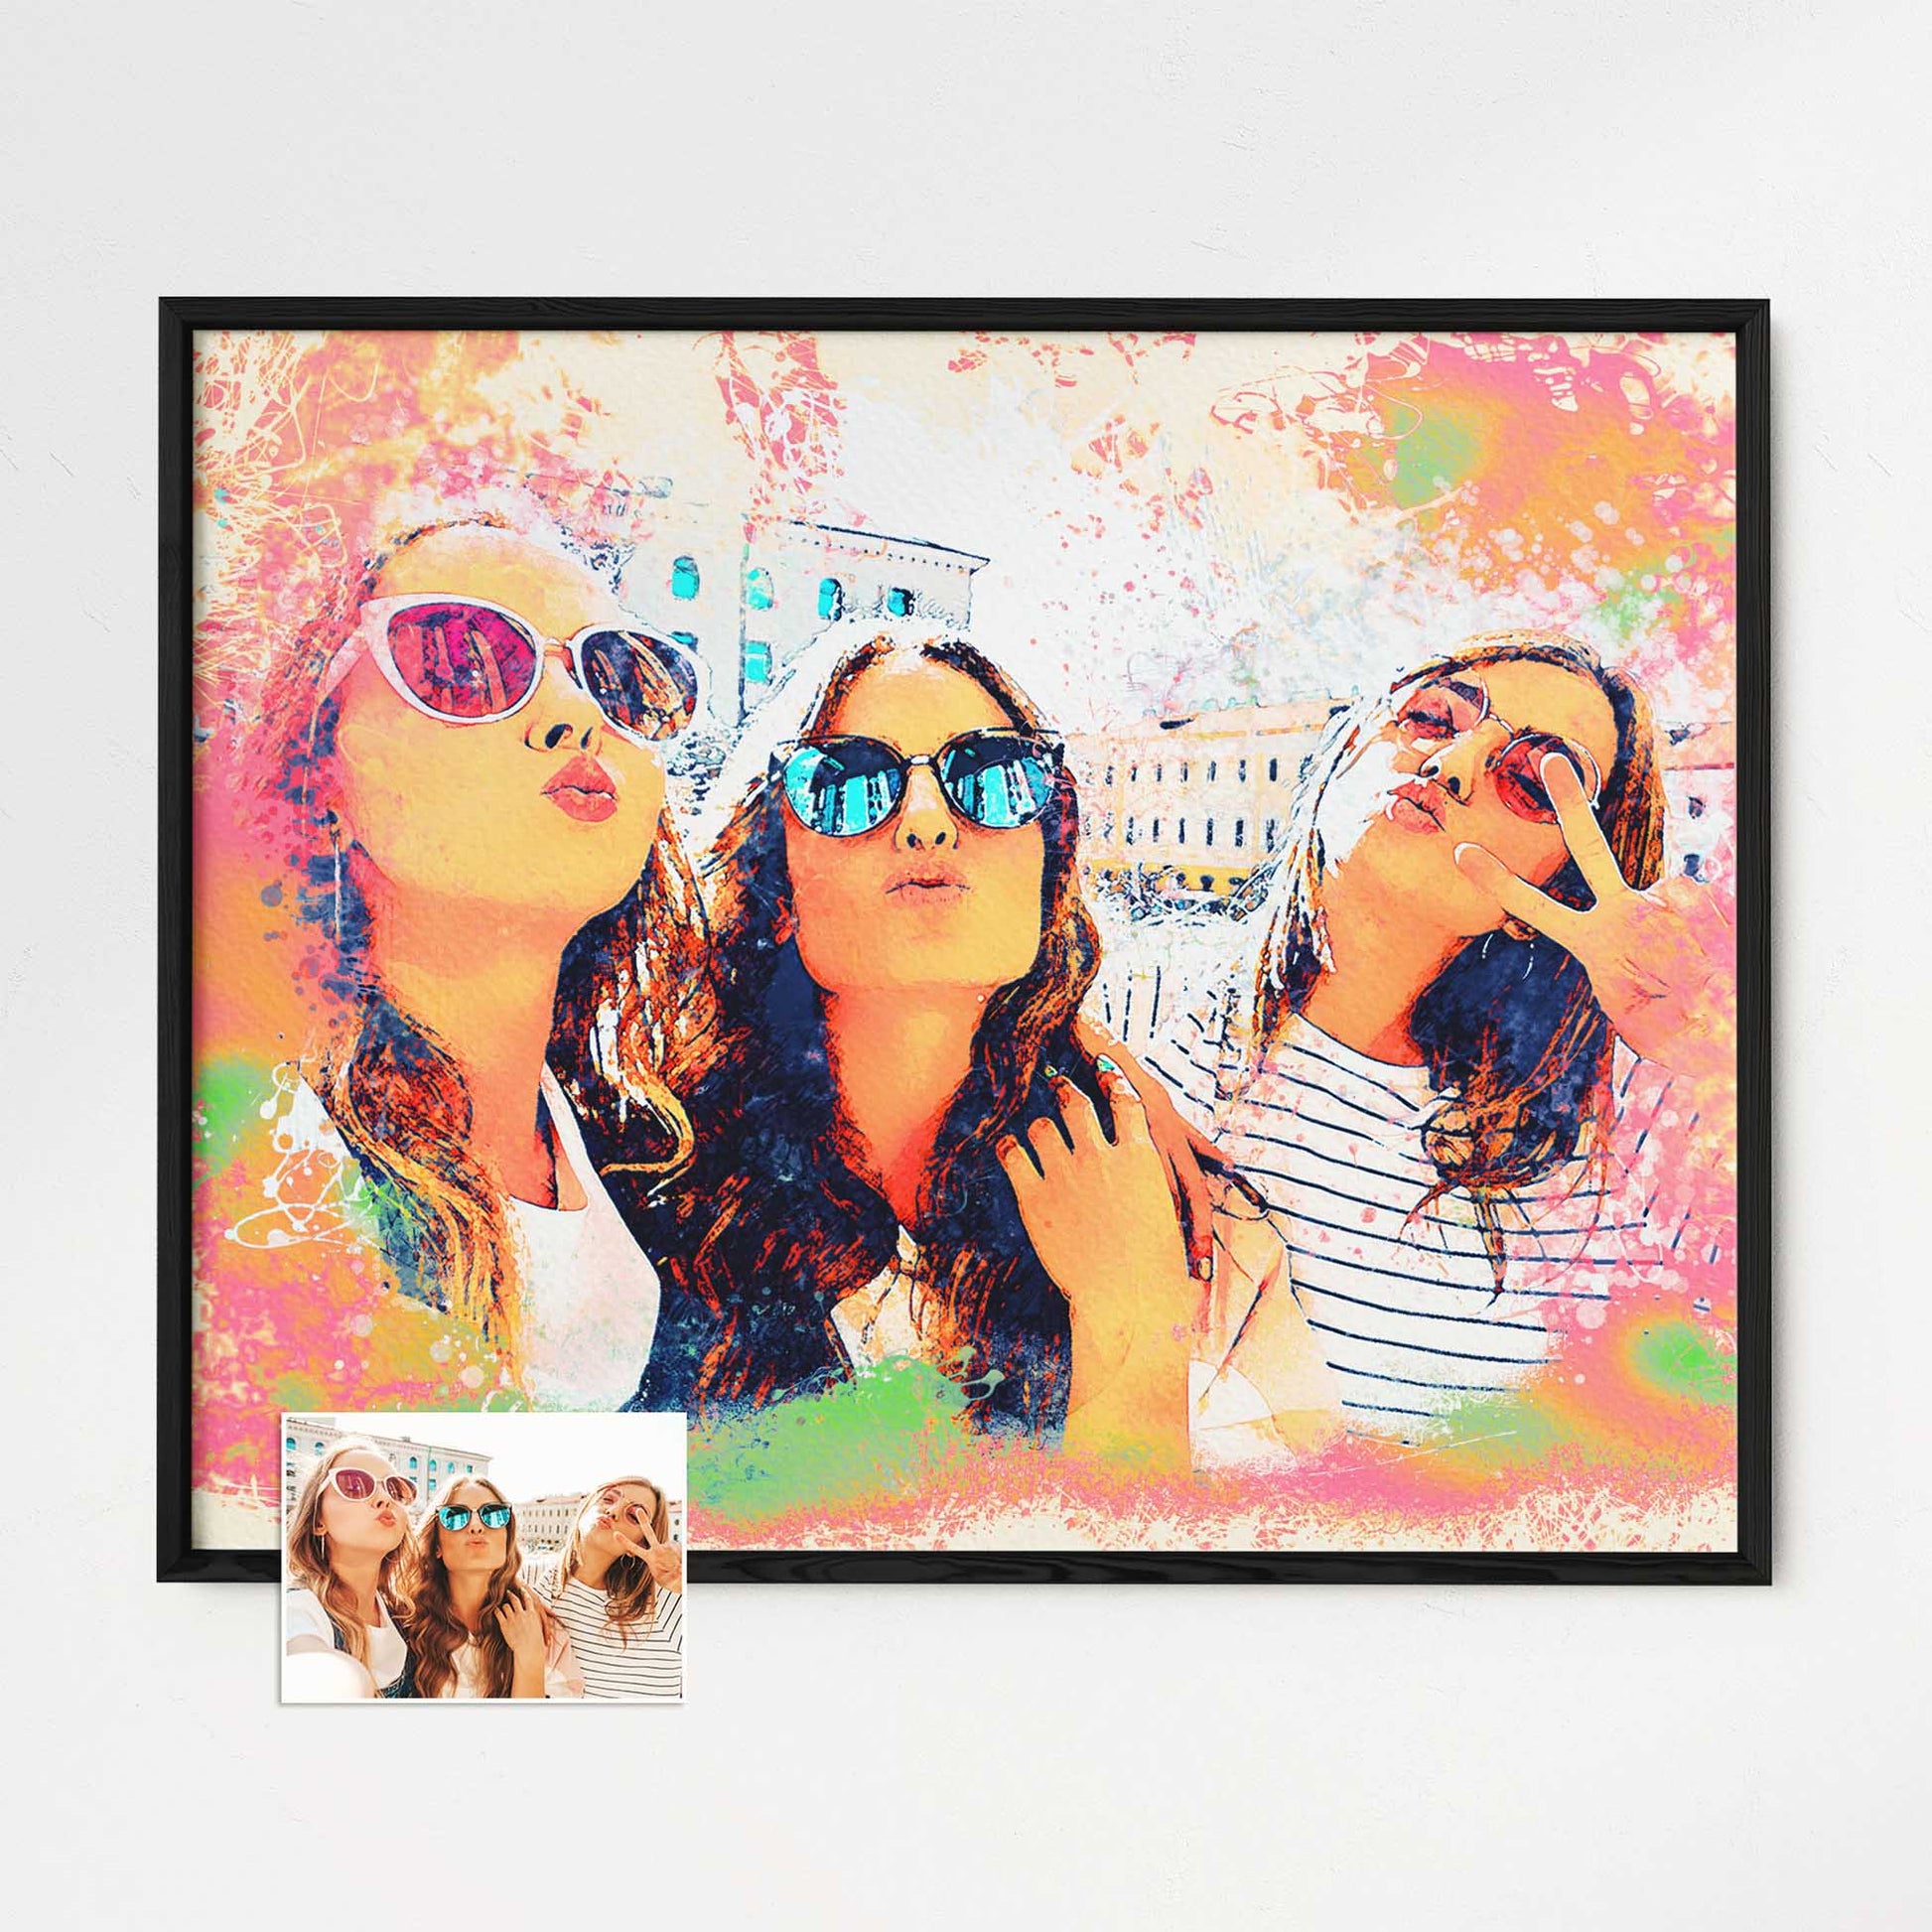 Unleash Your Imagination: Immerse yourself in the world of imagination with this personalised watercolour splash framed print. Its vibrant and colourful design sparks creativity and brings a cool and refreshing vibe to your home decor